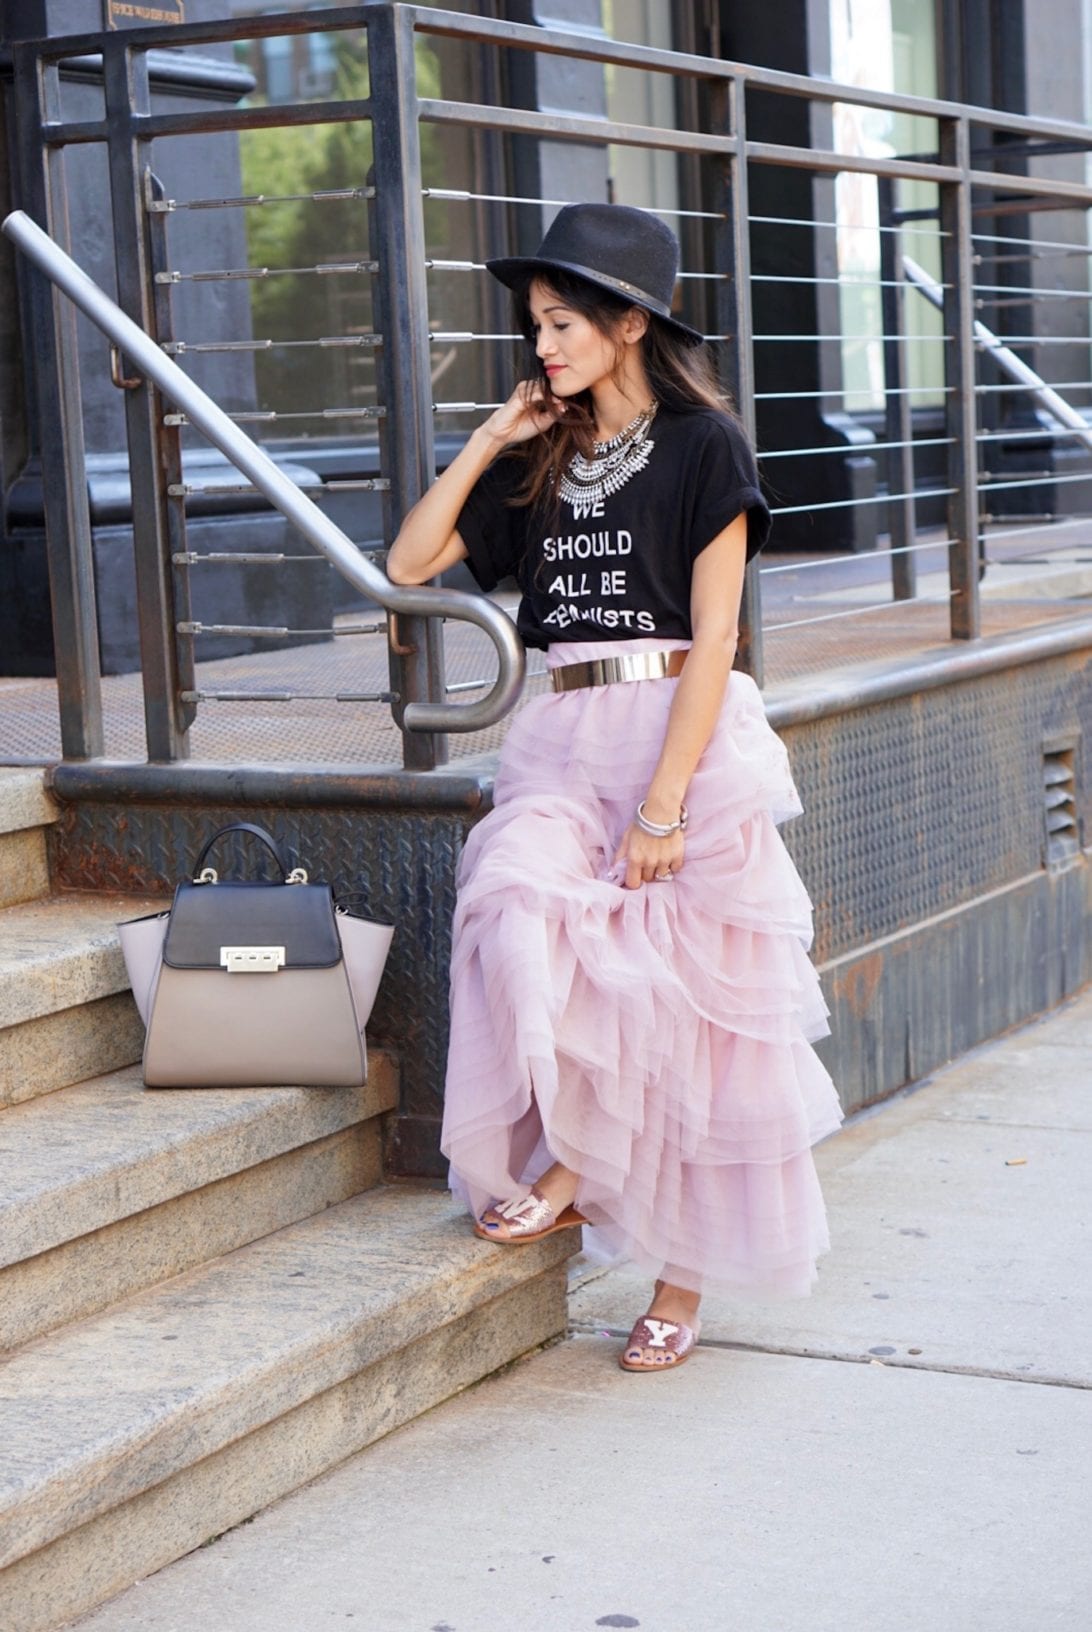 NYC STREET STYLE, New York FASHION WEEK, New York CITY, NYFW 2017, NYFW STREET STYLE, STREET STYLE, FEMINIST, TULLE SKIRT, SEX AND THE CITY OUTFIT, NY GLITTER FLATS, ZAC ZAC POSEN BAG, VOGUE PARTY, VOGUE BRUNCH 